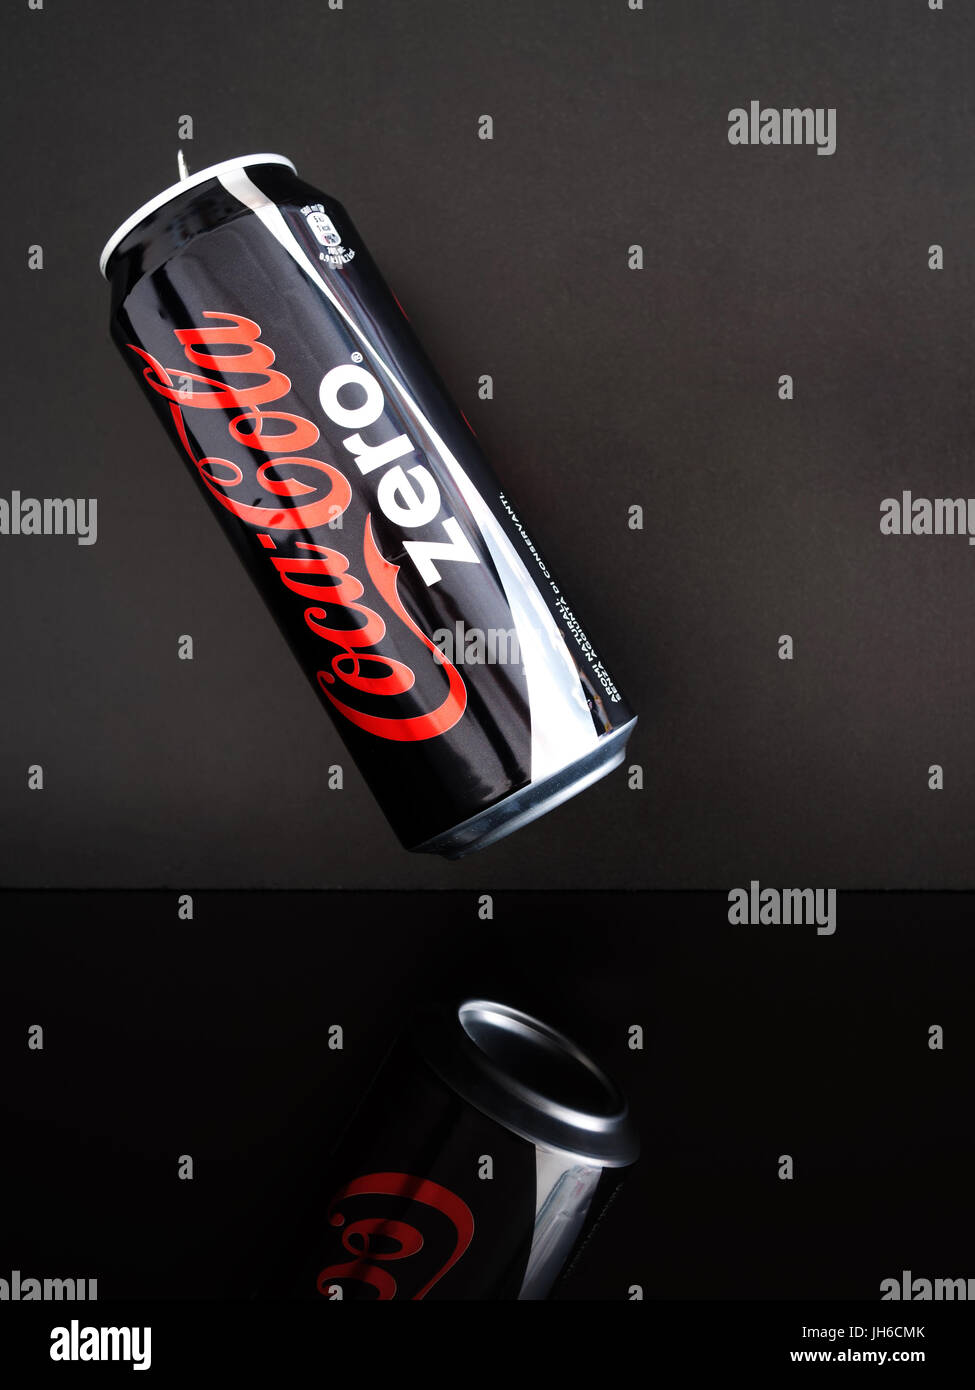 Coca Cola Tin Can High Resolution Stock Photography and Images - Alamy